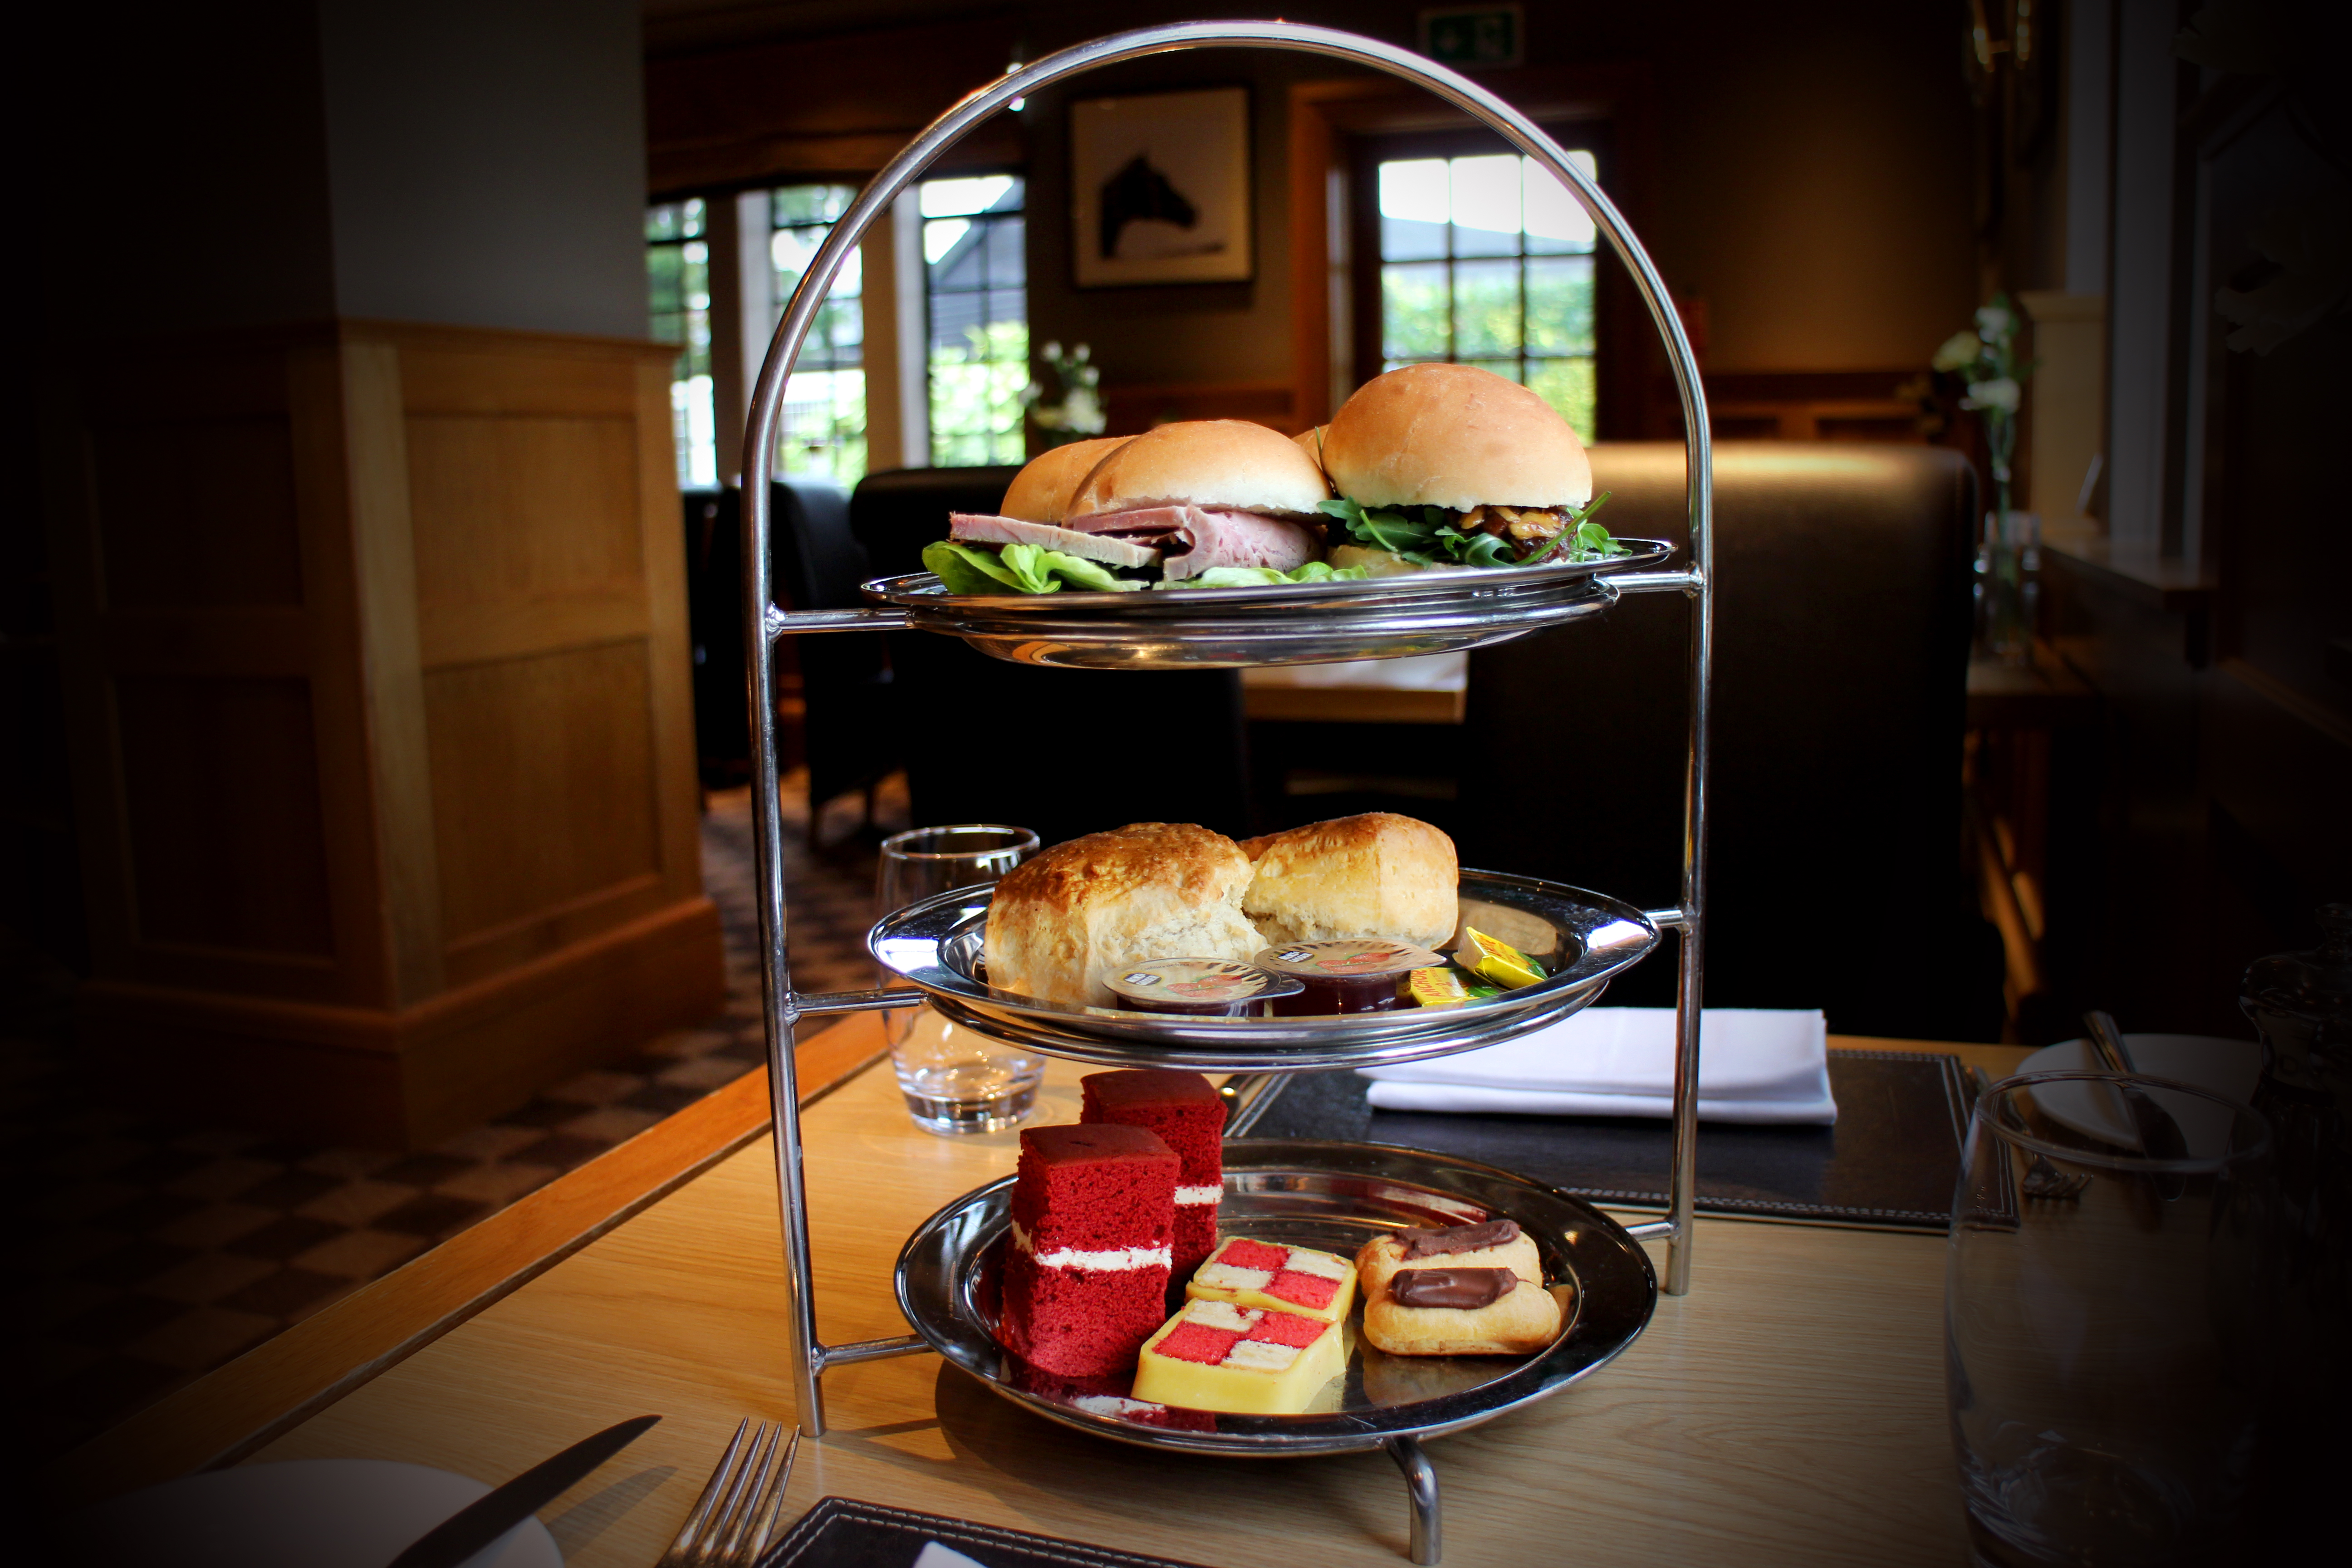 Treat someone to a delicious Afternoon Tea